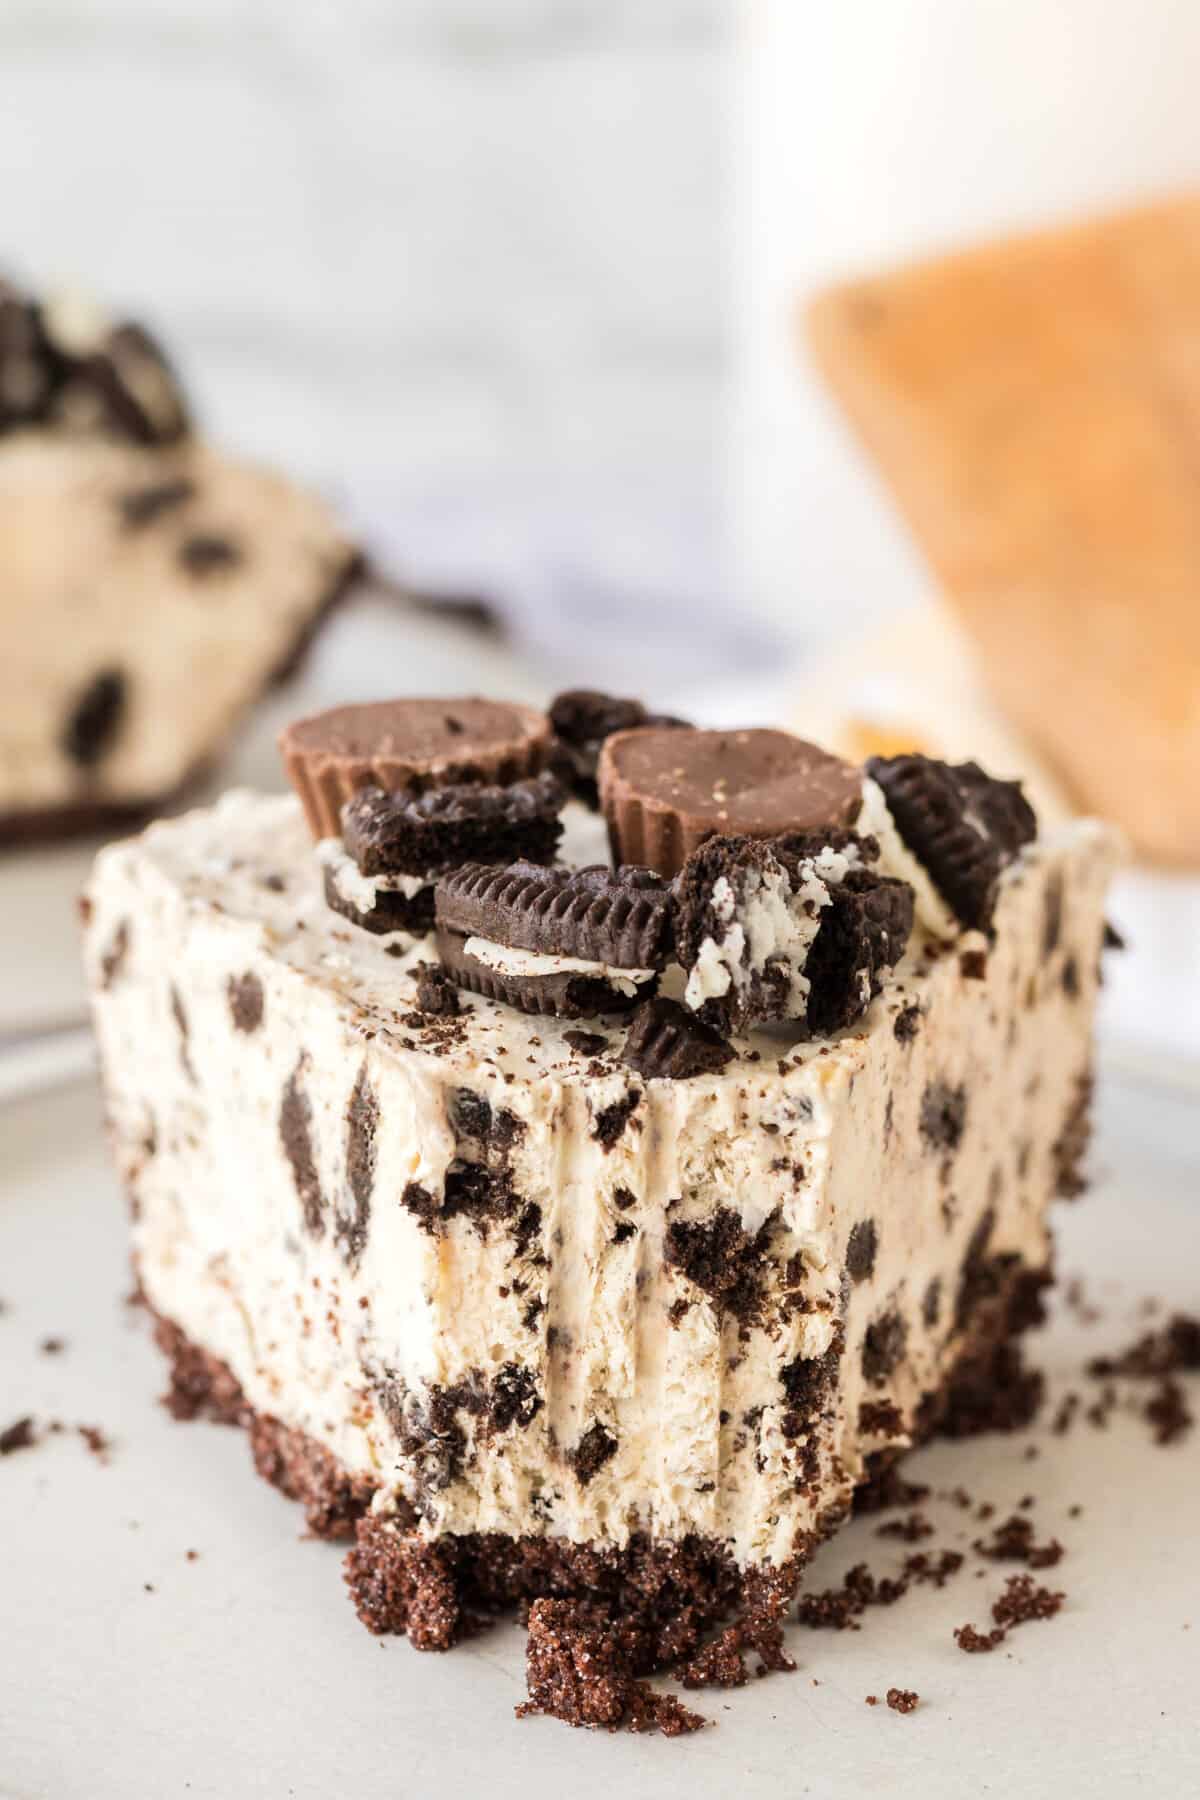 Slice of Oreo Peanut Butter Pie with chocolate crust, creamy peanut butter filling with crushed oreos, and mini reese's and chopped oreos on top. A forkfull has been taken out of the pie.